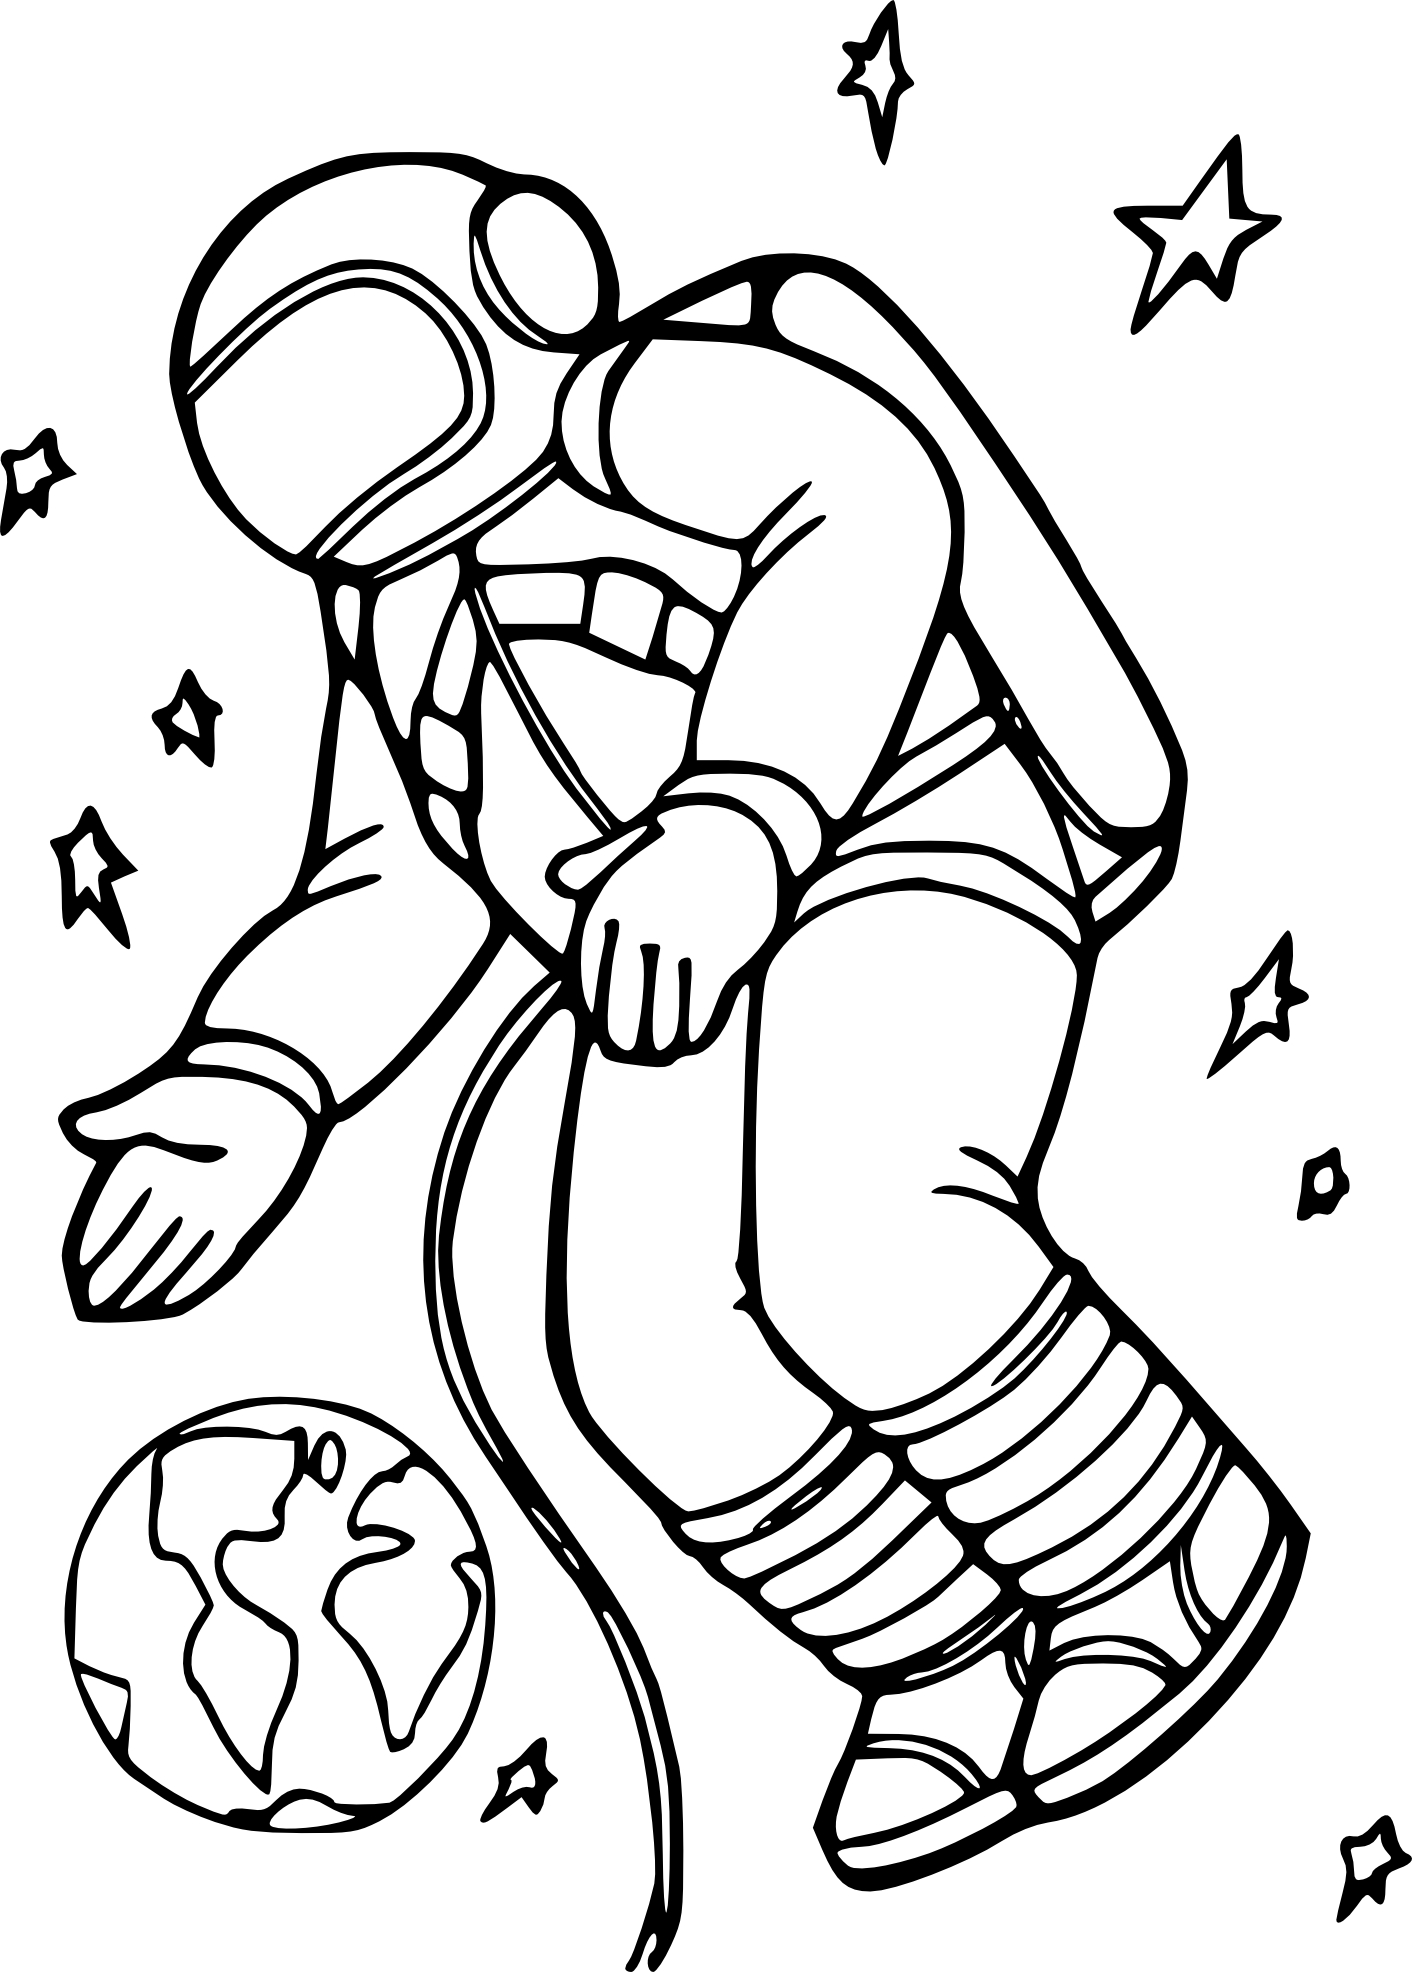 Cosmonaut coloring page